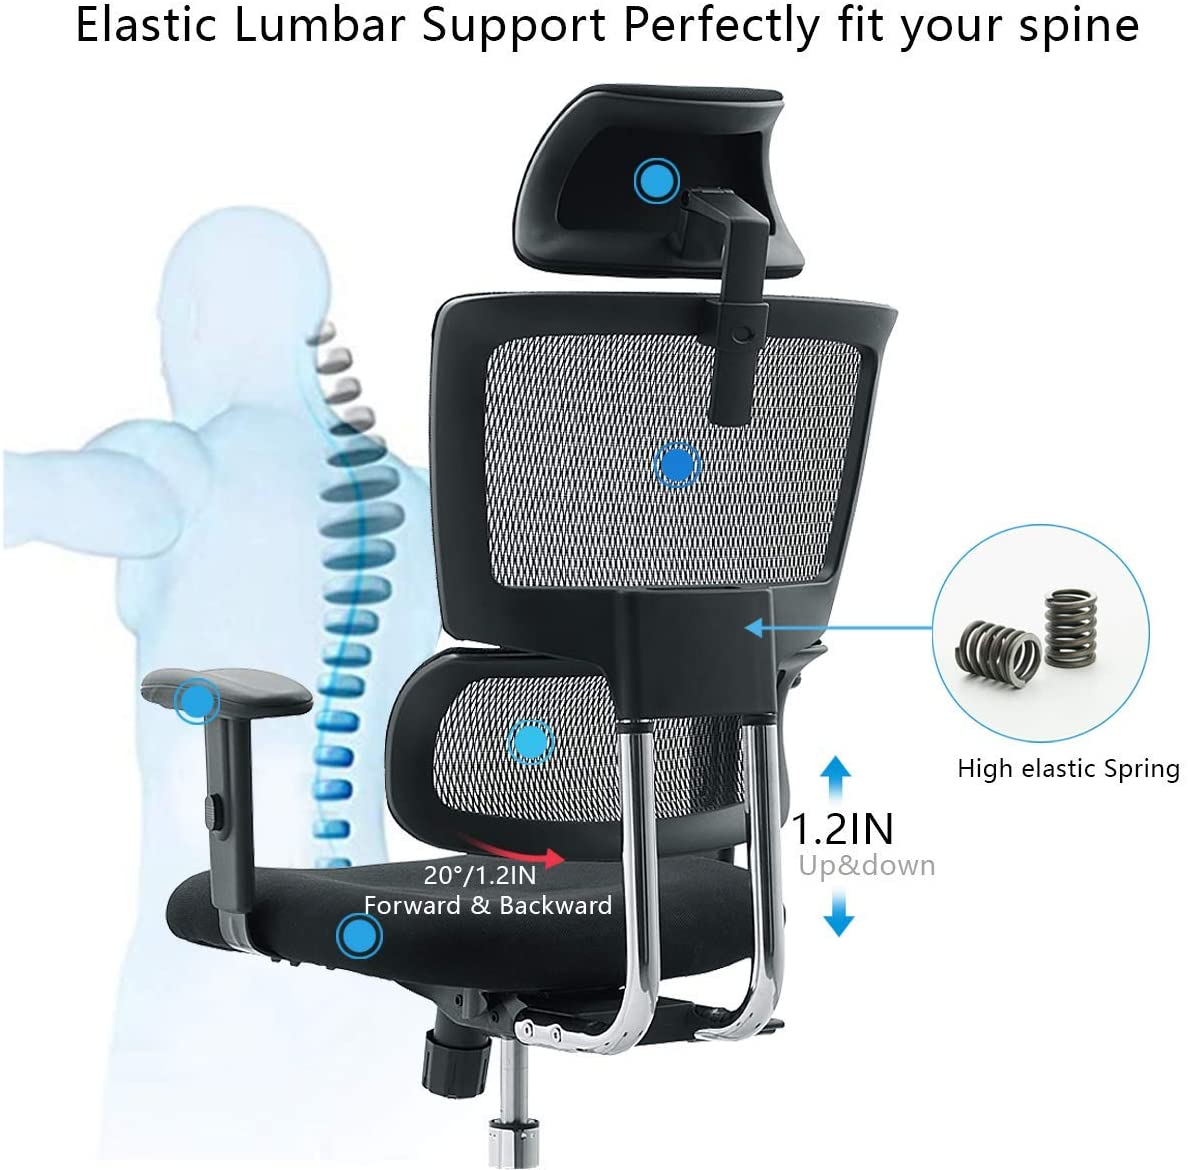 Ticova Ergonomic Office Chair - High Back Desk Chair with Elastic Lumbar Support & Thick Seat Cushion - 140°Reclining & Rocking Mesh Computer Chair with Adjustable Headrest, Armrest - image 3 of 5